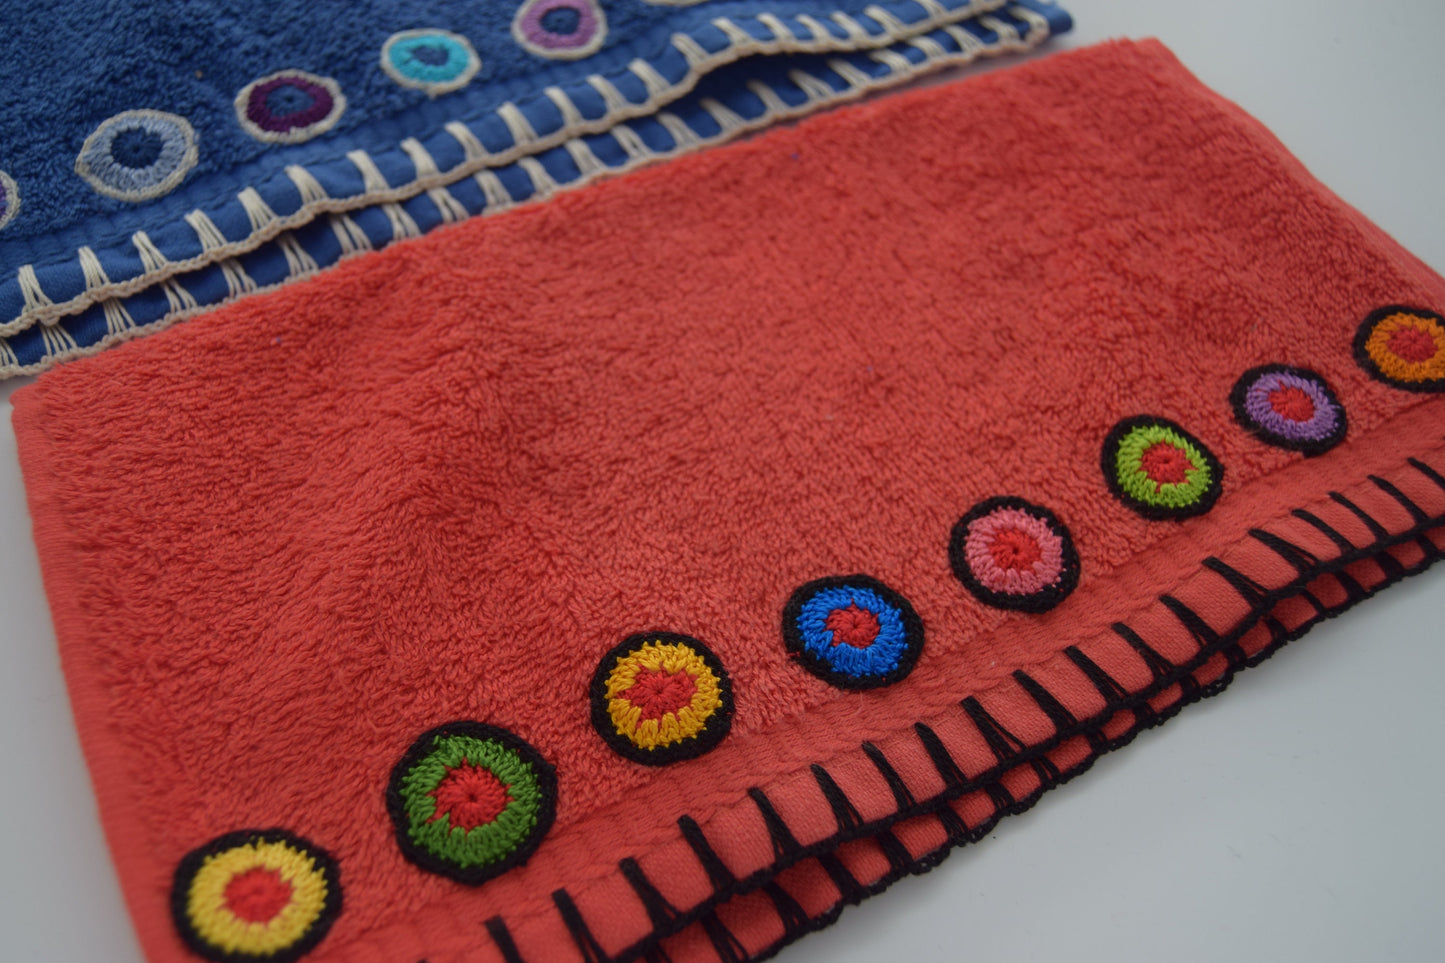 Embroidered Hand Towel - Hand Towel with Colorful Circles